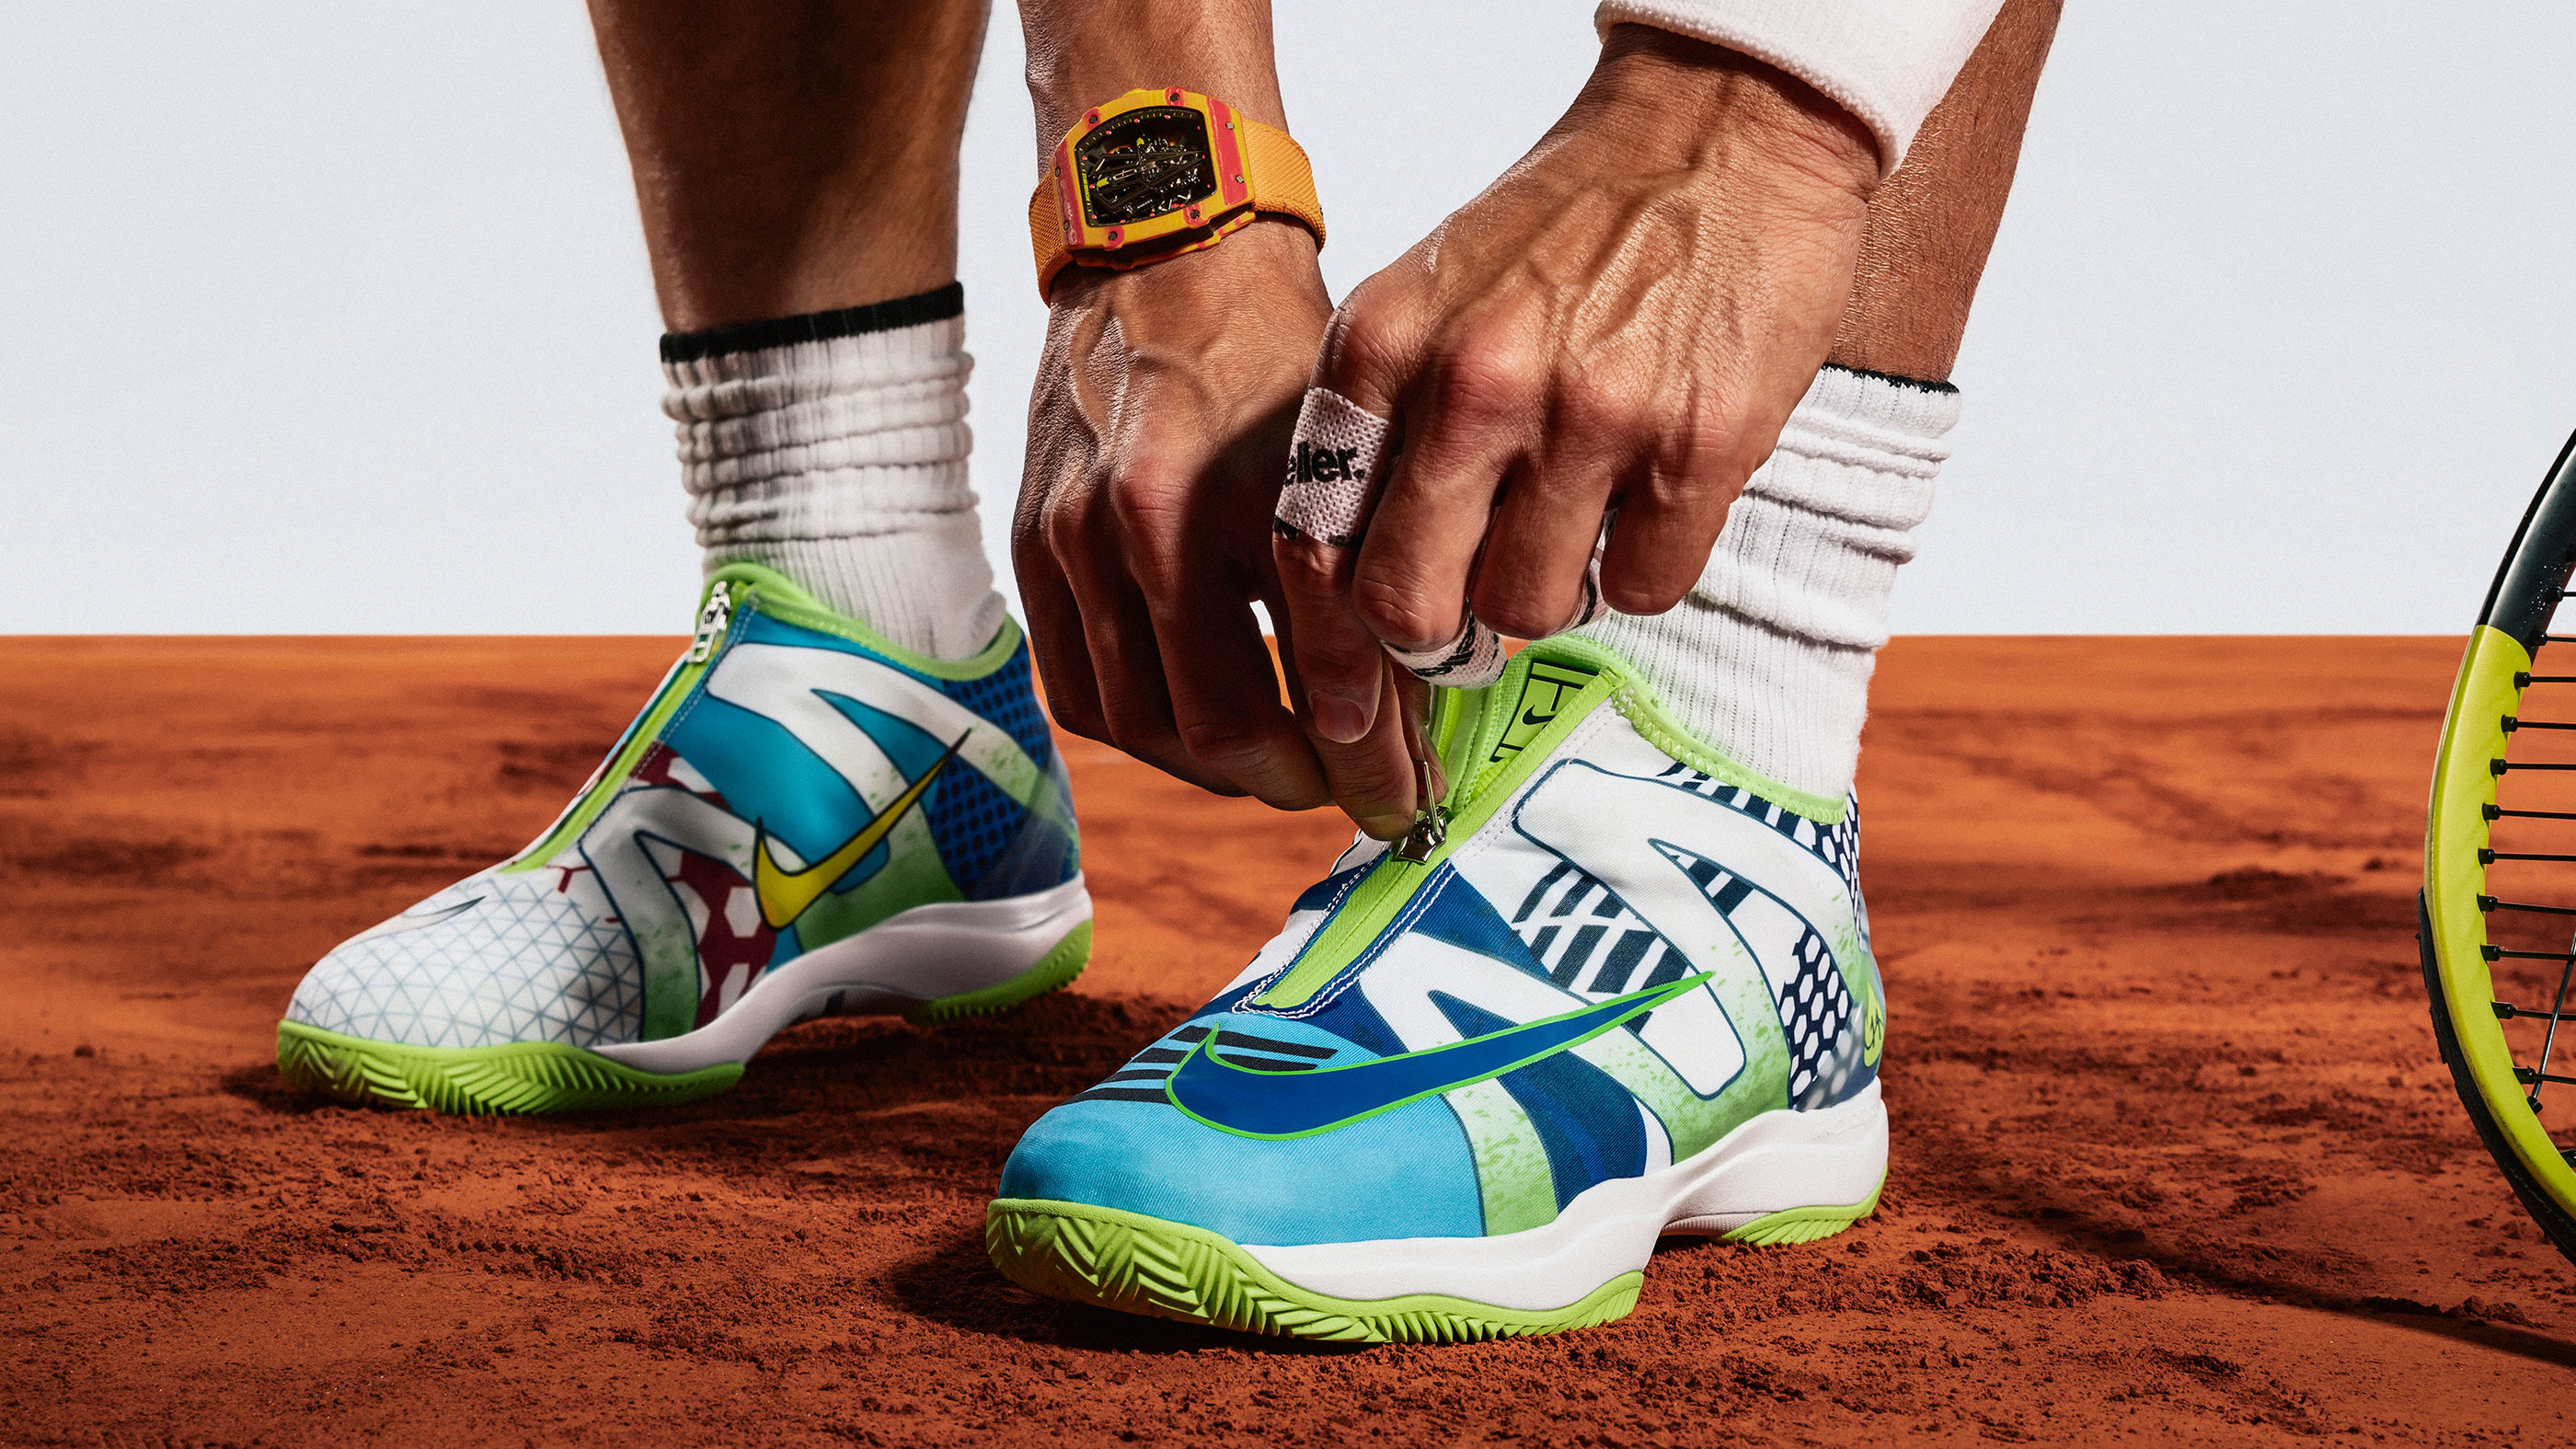 Rafael Nadal Is Getting His Own 'What The' Shoe | Complex